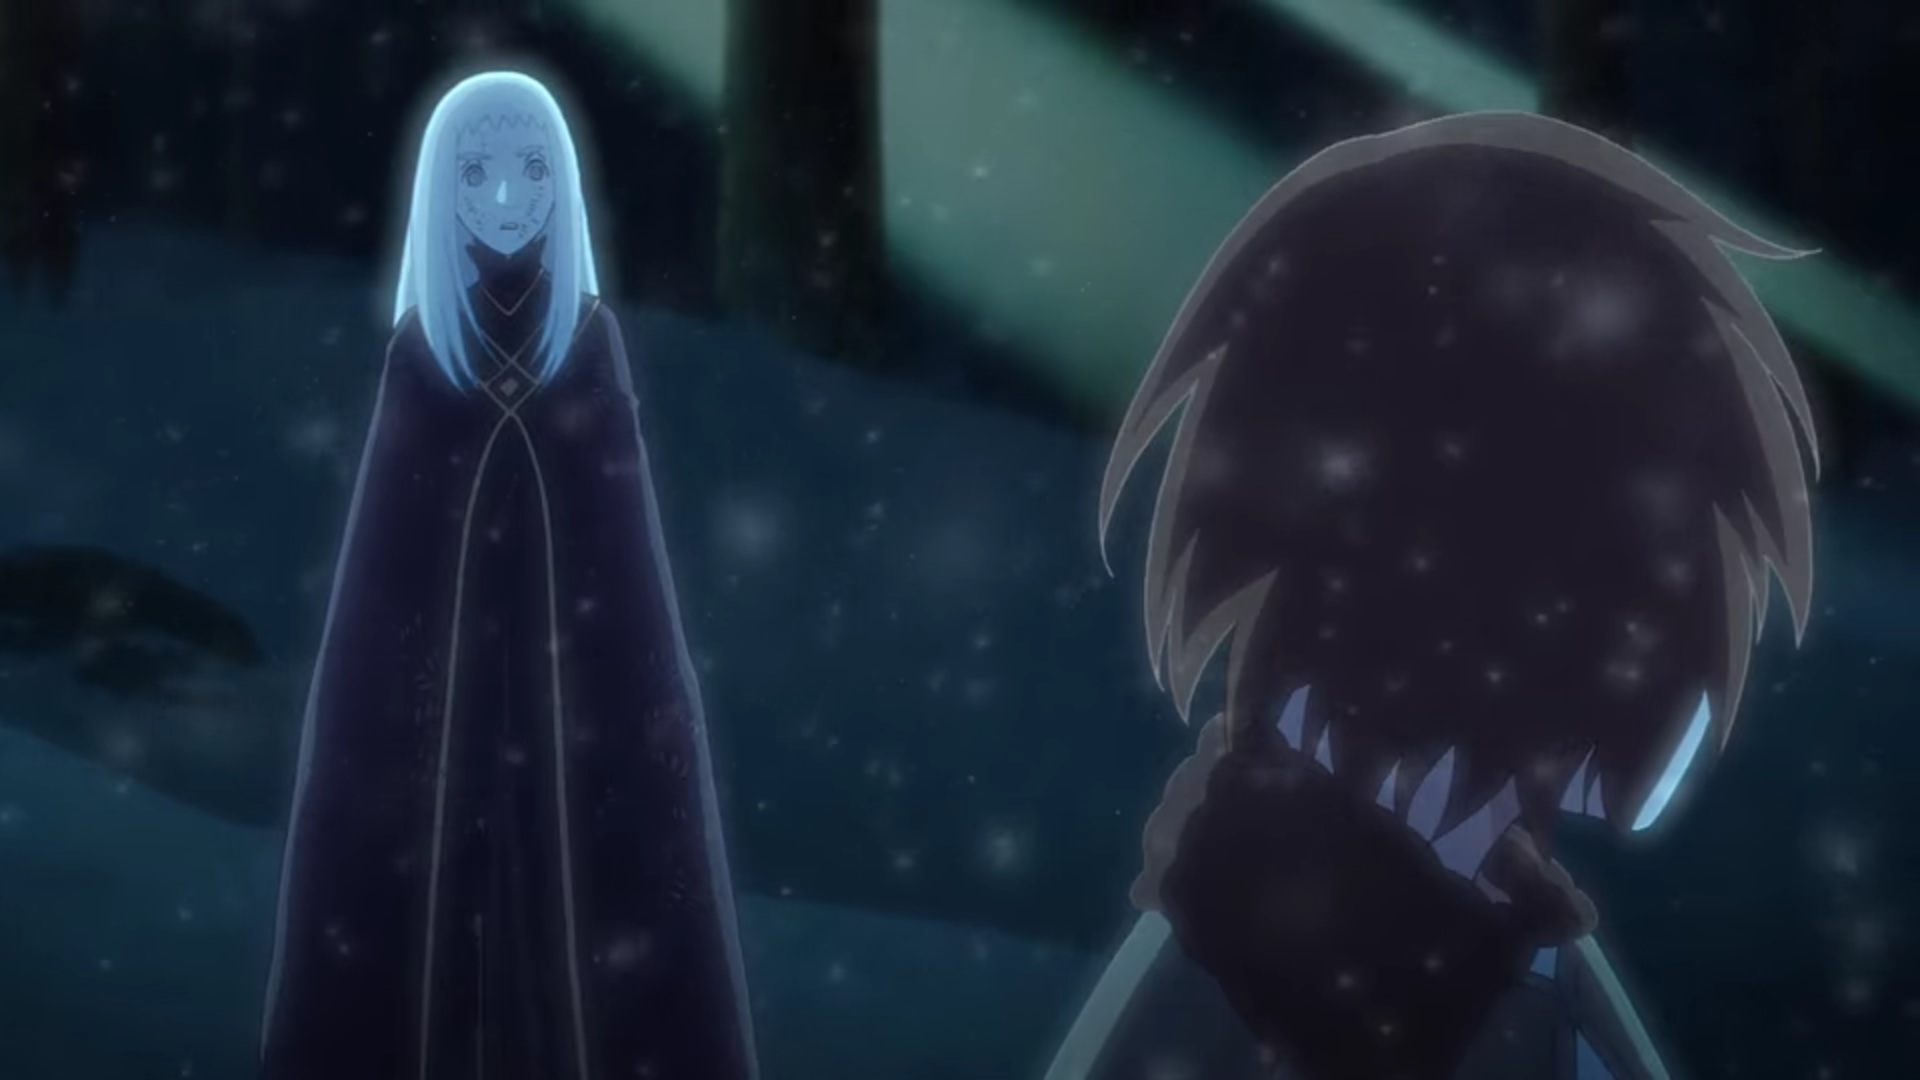 Netflix Anime Series 'Vampire in the Garden' Doesn't Have Much